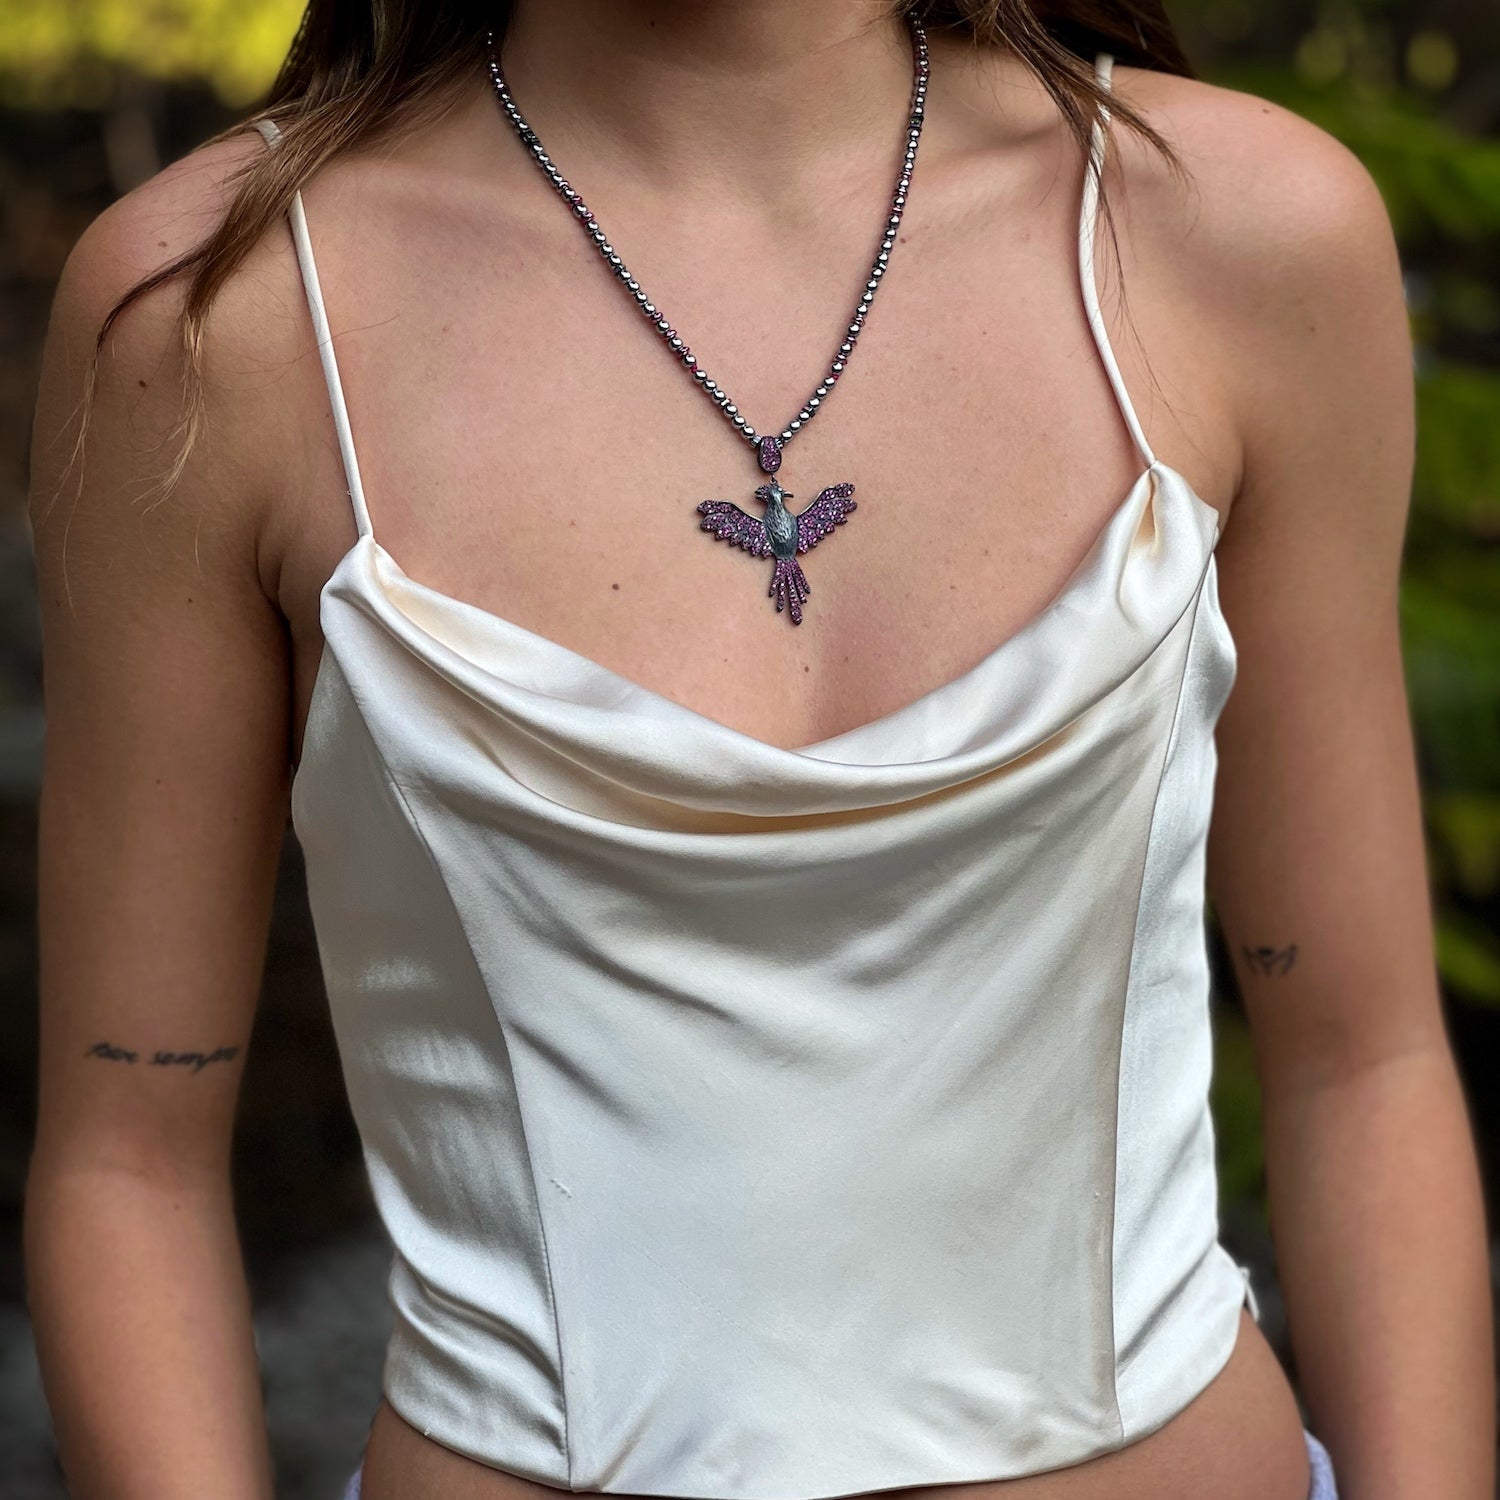 A model wearing the Inner Rebirth Phoenix Necklace, a symbol of strength and new beginnings.